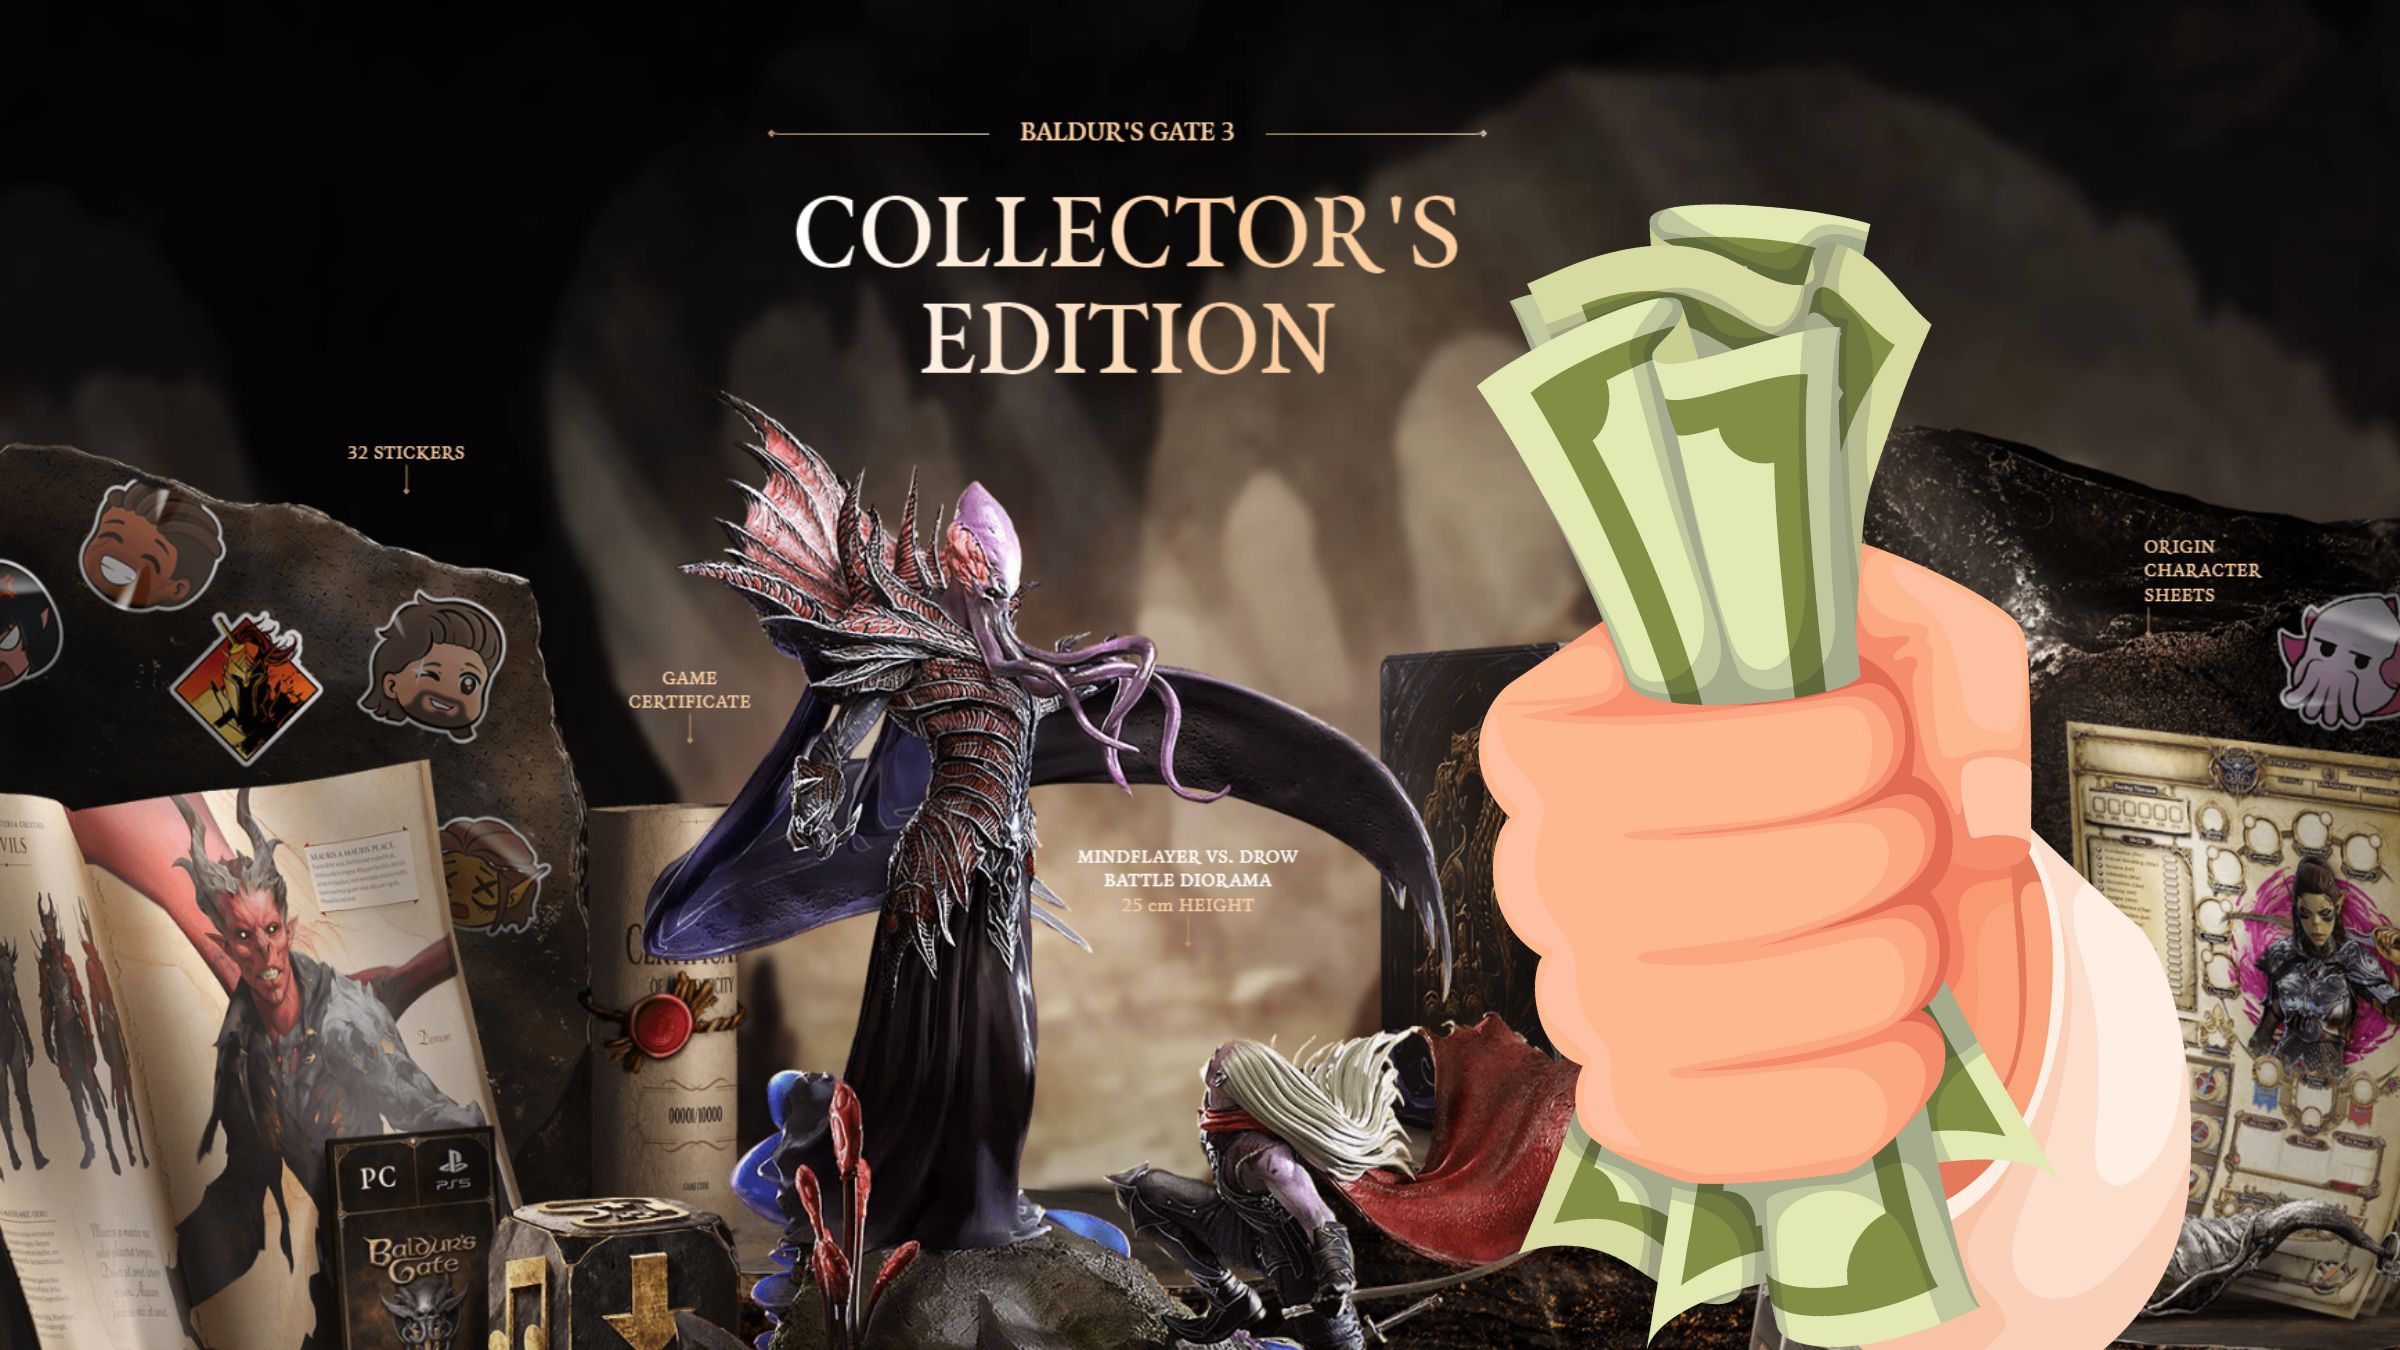 The Baldur’s Gate 3 Collector’s Edition achieves amazing prices